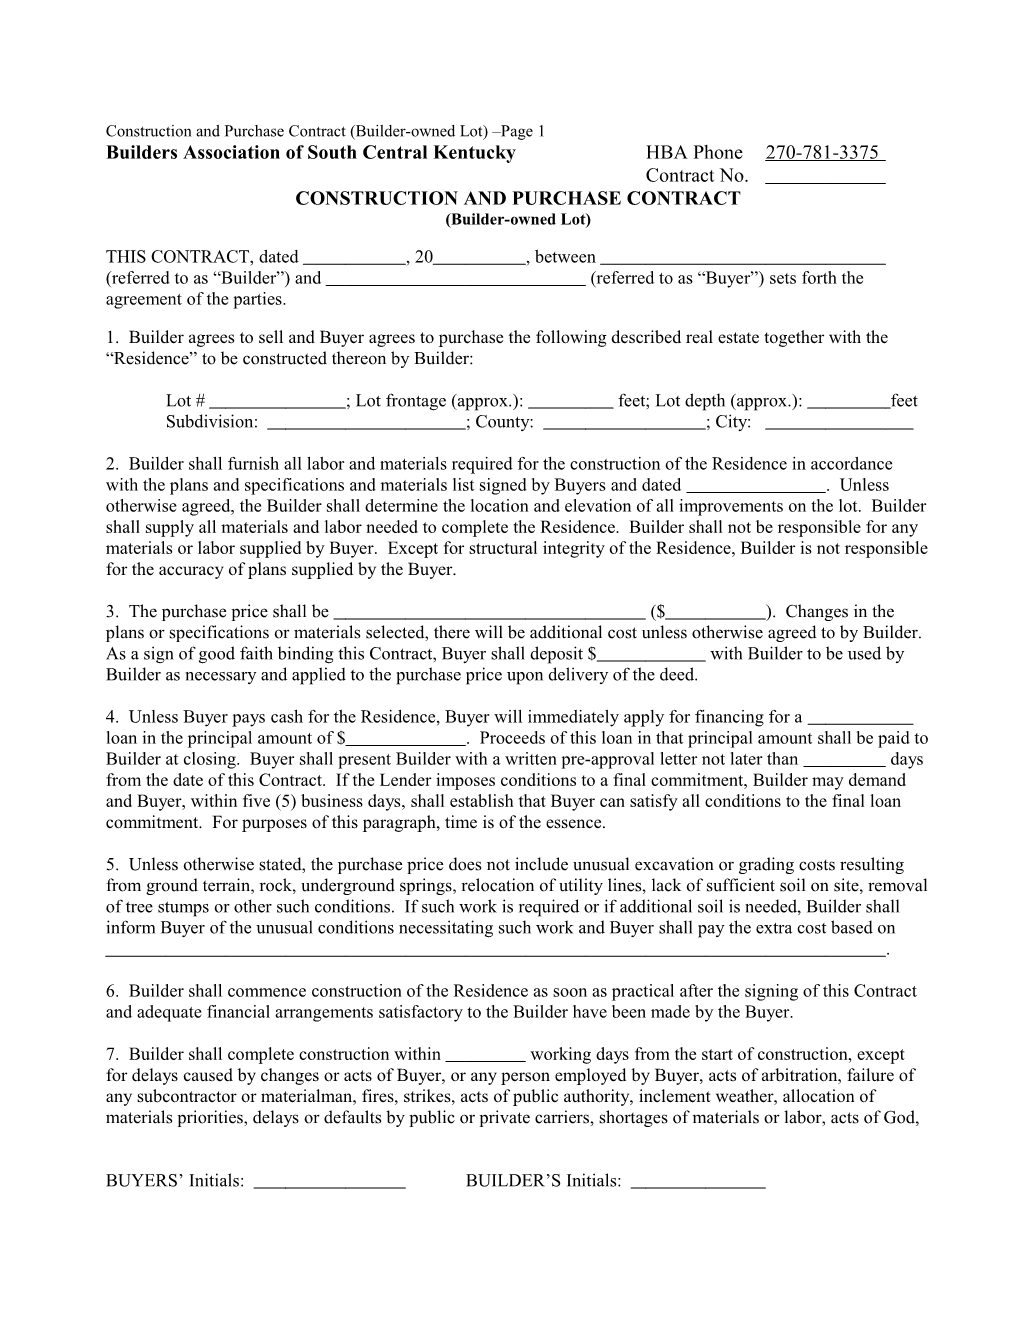 Construction and Purchase Contract (Builder-Owned Lot) Page 1